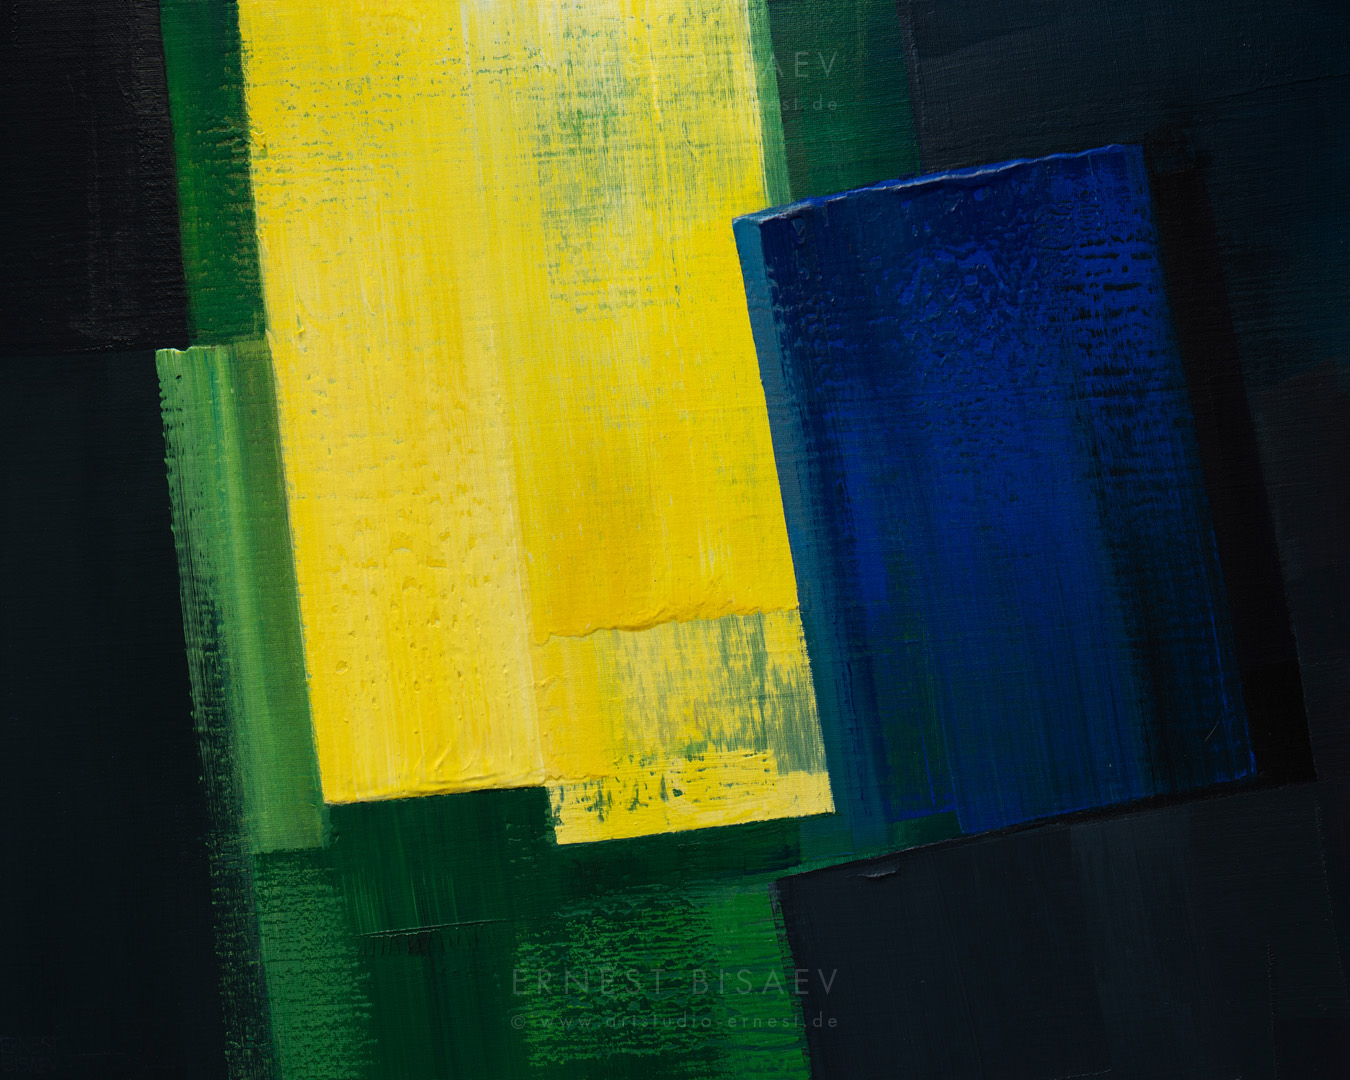 Yellow Green and Blue 281019, 80x100cm, 2019 © Ernest Bisaev